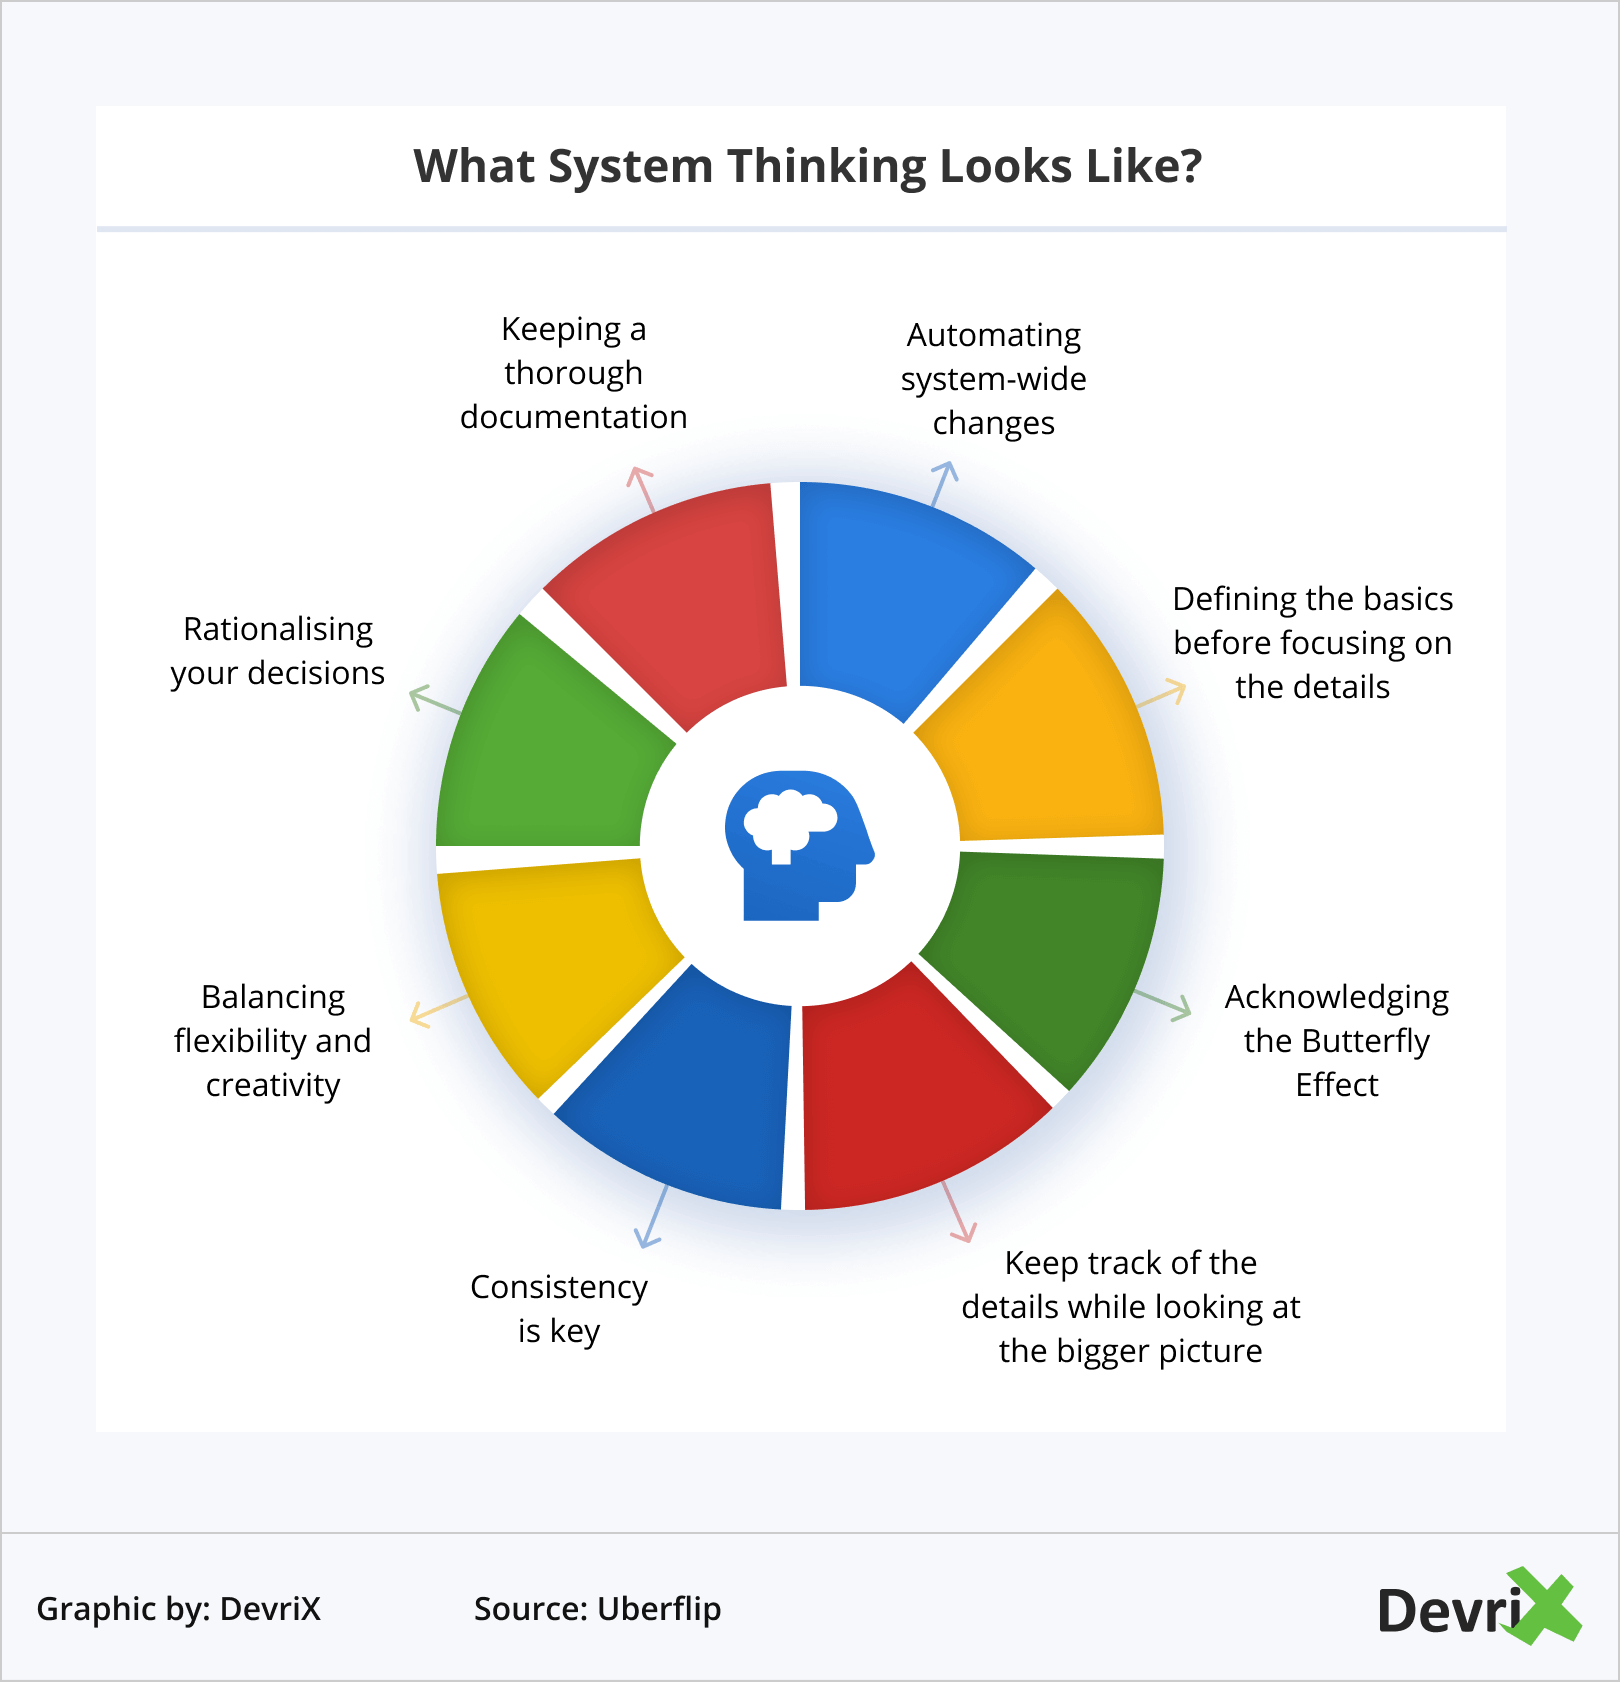 What System Thinking Looks Like